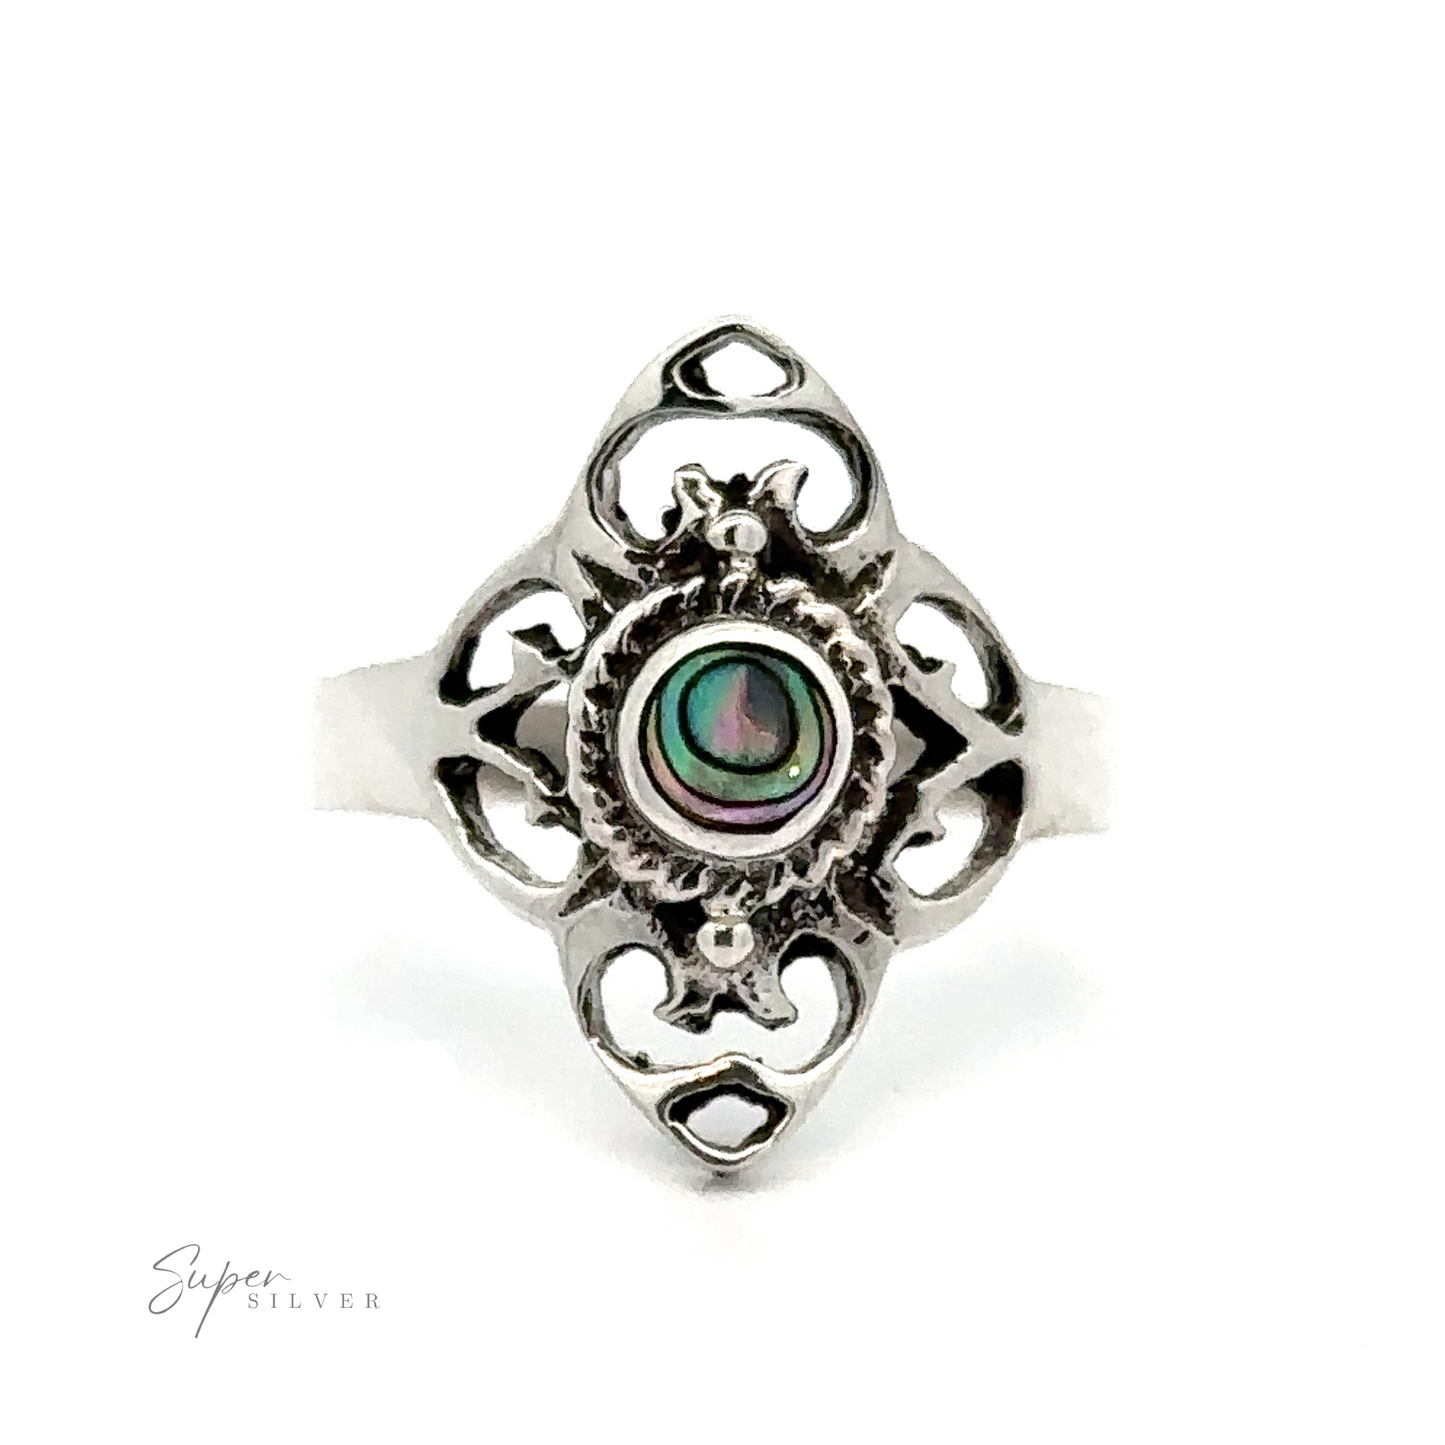 
                  
                    A Filigree Inlaid Stone Ring with a green inlaid stone has characteristics reminiscent of the Victorian era.
                  
                